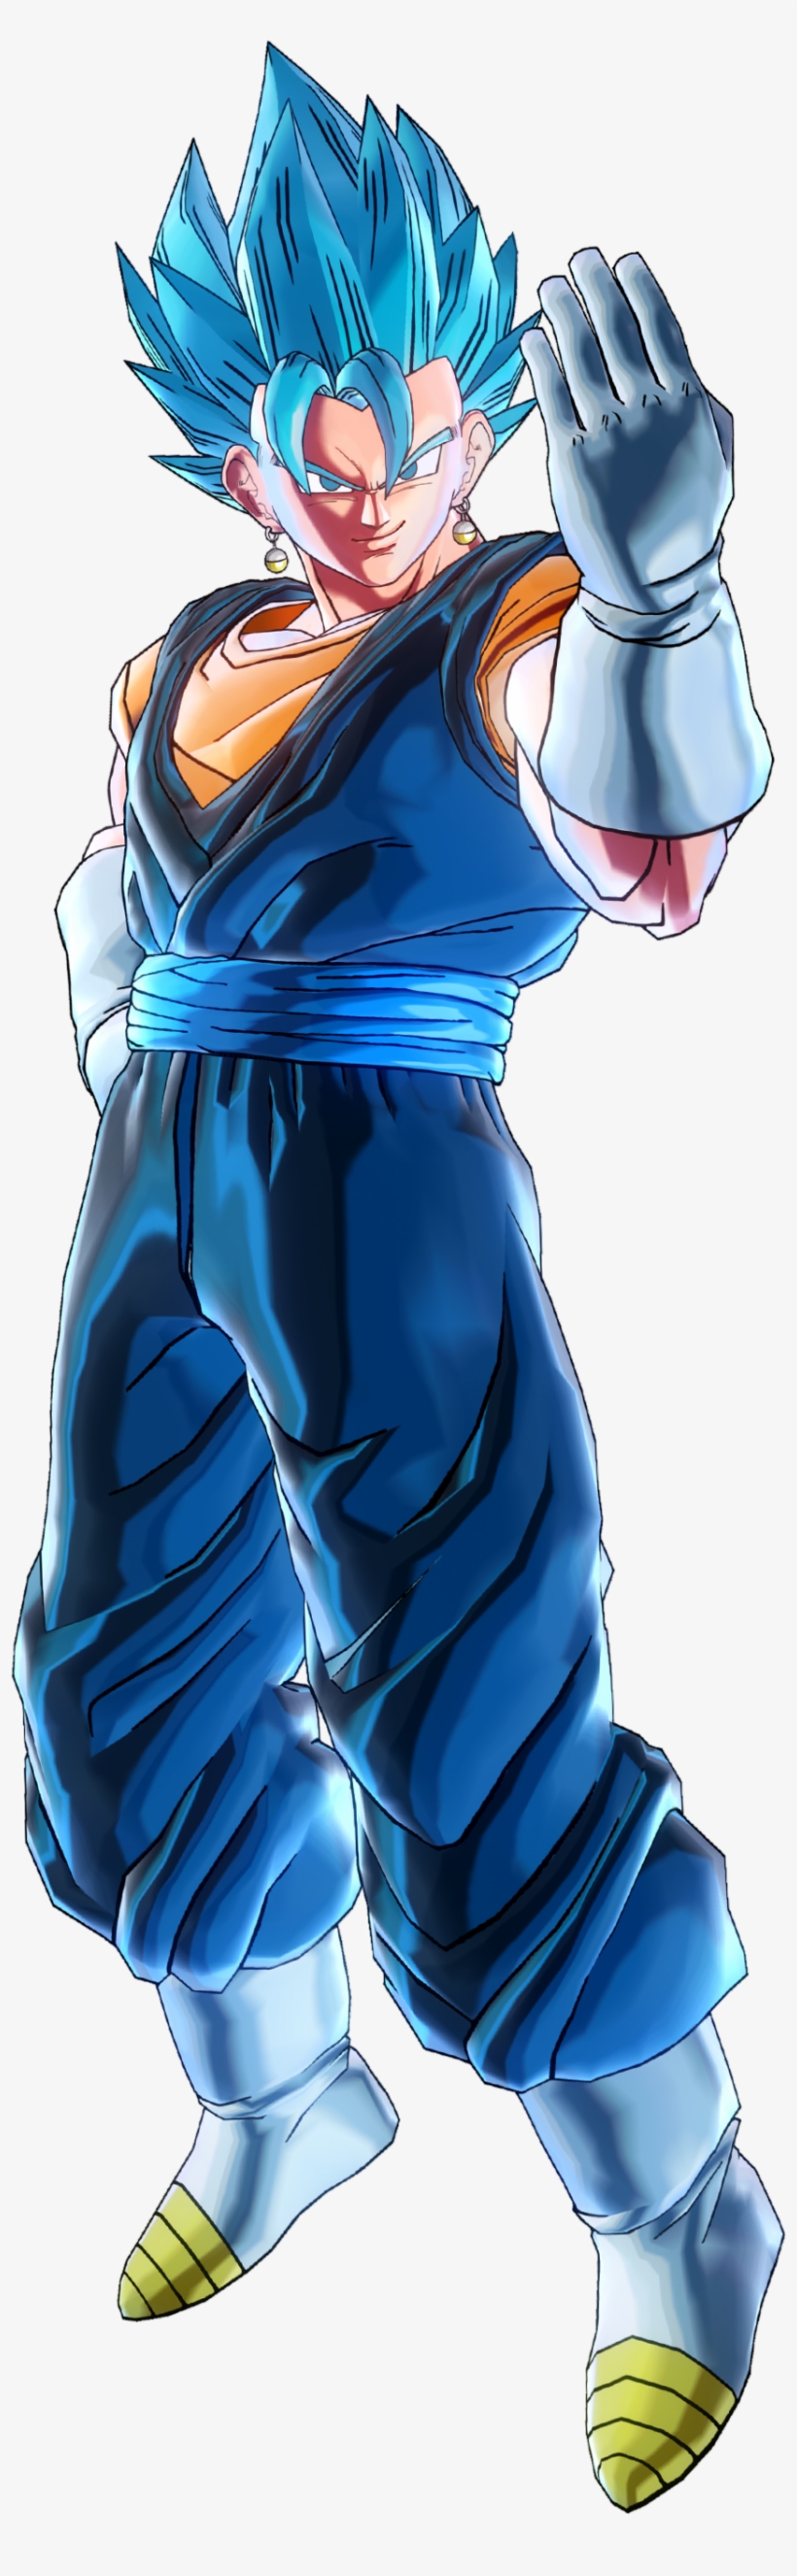 Dragon Ball Xenoverse 2 For Switch Launches This Fall - ゼノバース 2 かっこいい アバター, transparent png #3444218